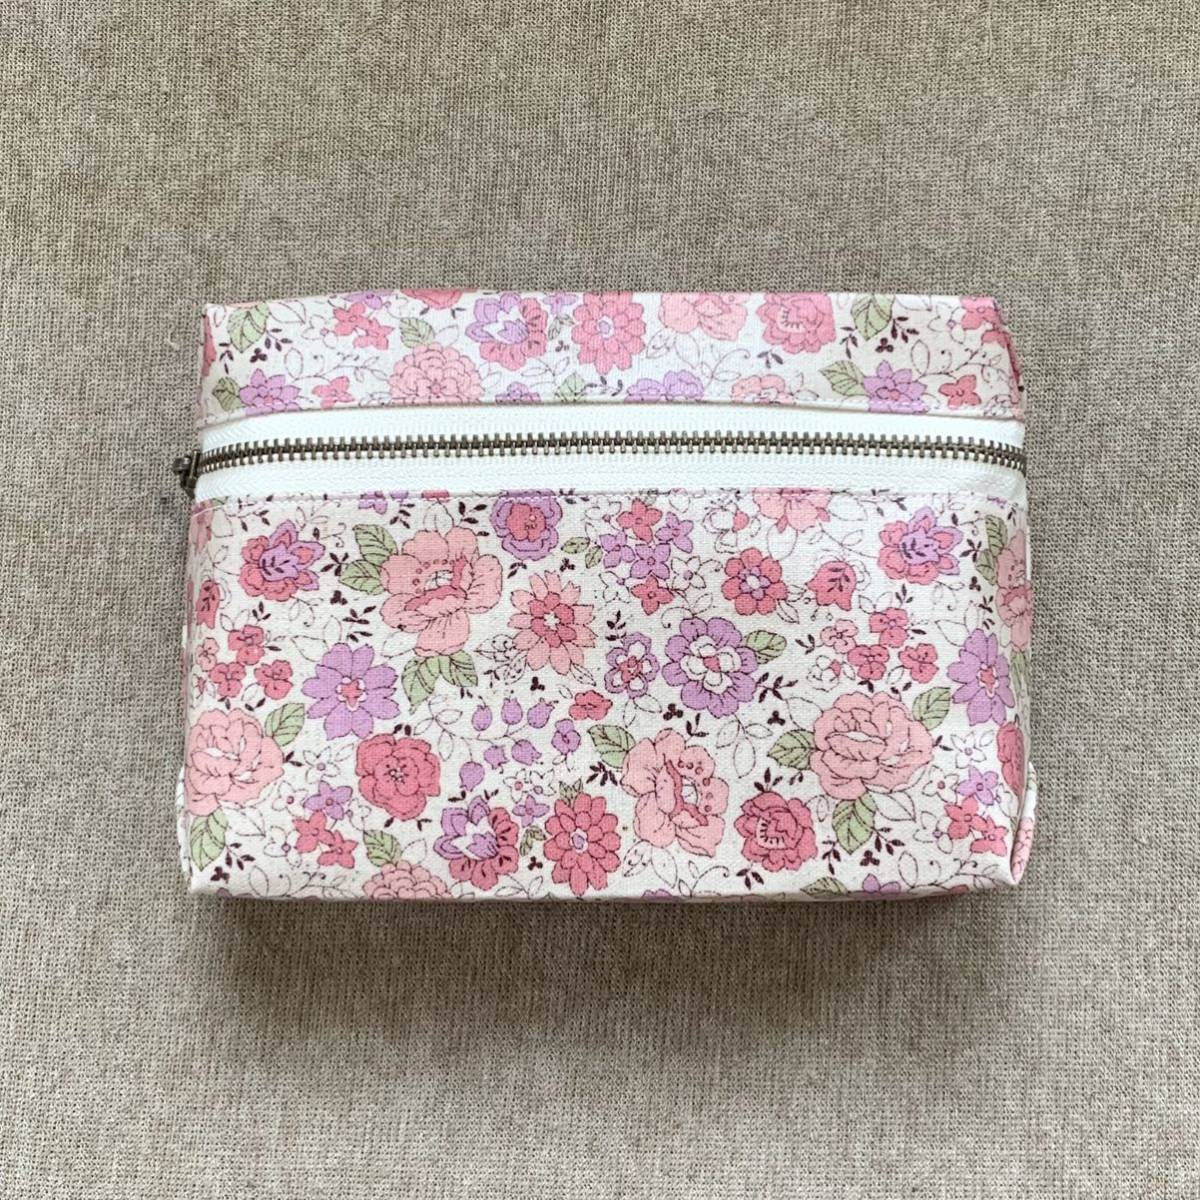  free shipping * pre-moist wipes case * bacteria elimination seat pouch * Northern Europe manner *YUWA* floral print 